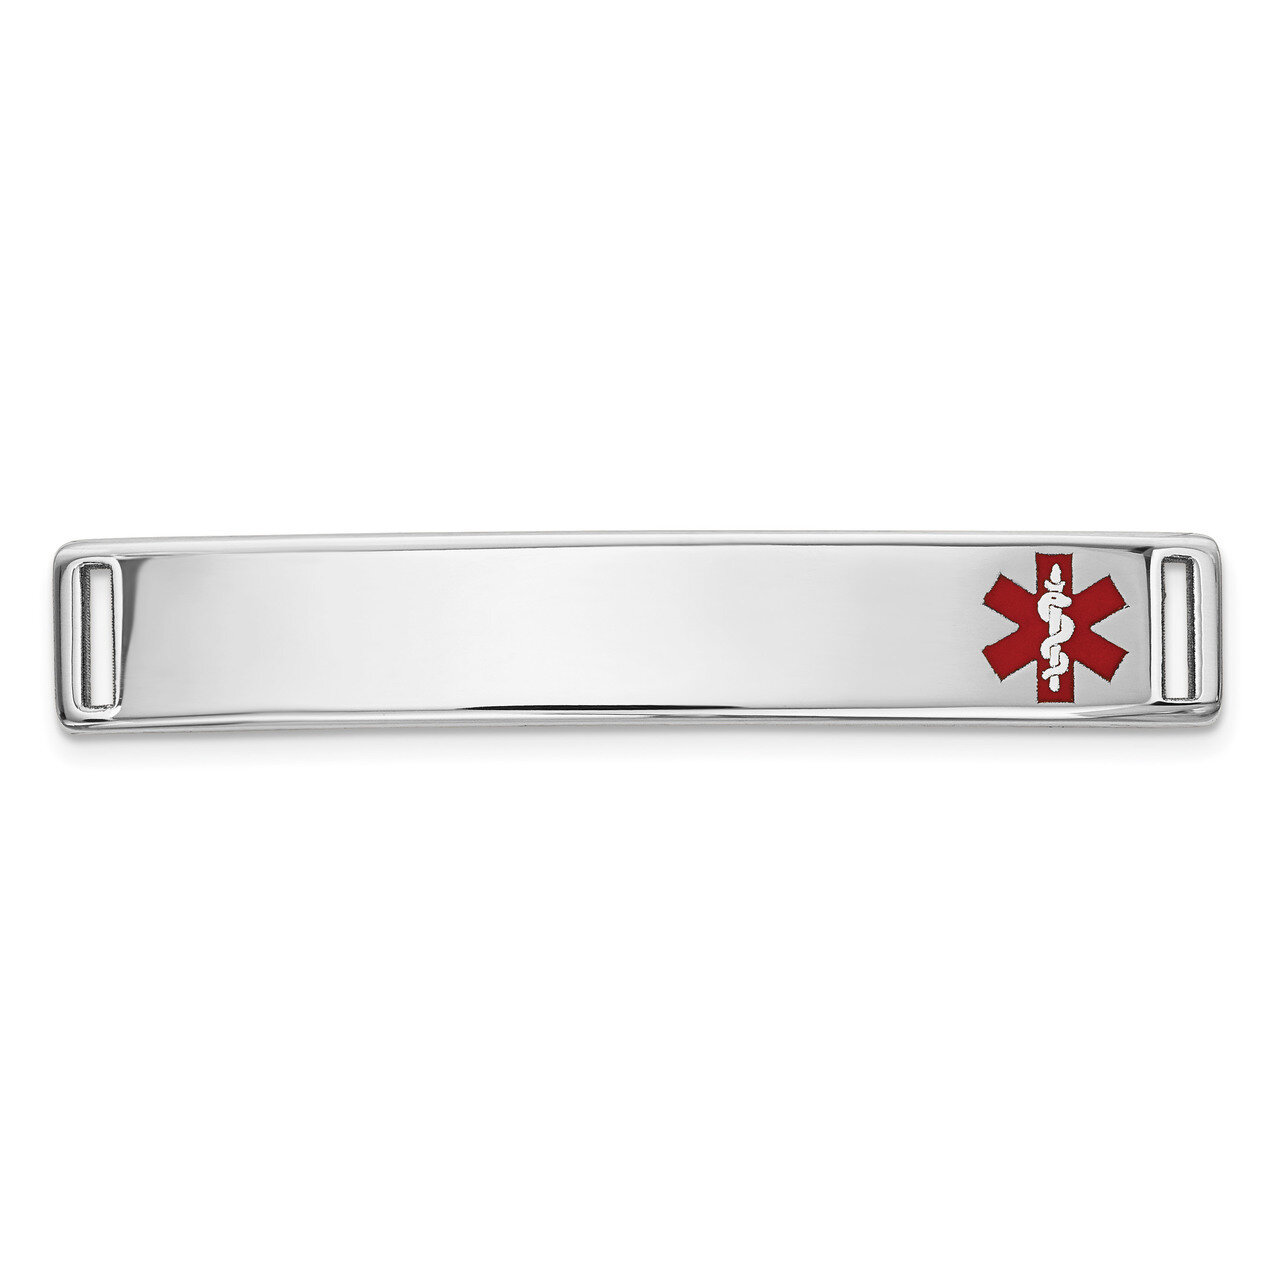 Epoxy Enameled Medical ID Off Ctr Plate # 817 14k white Gold XM646W